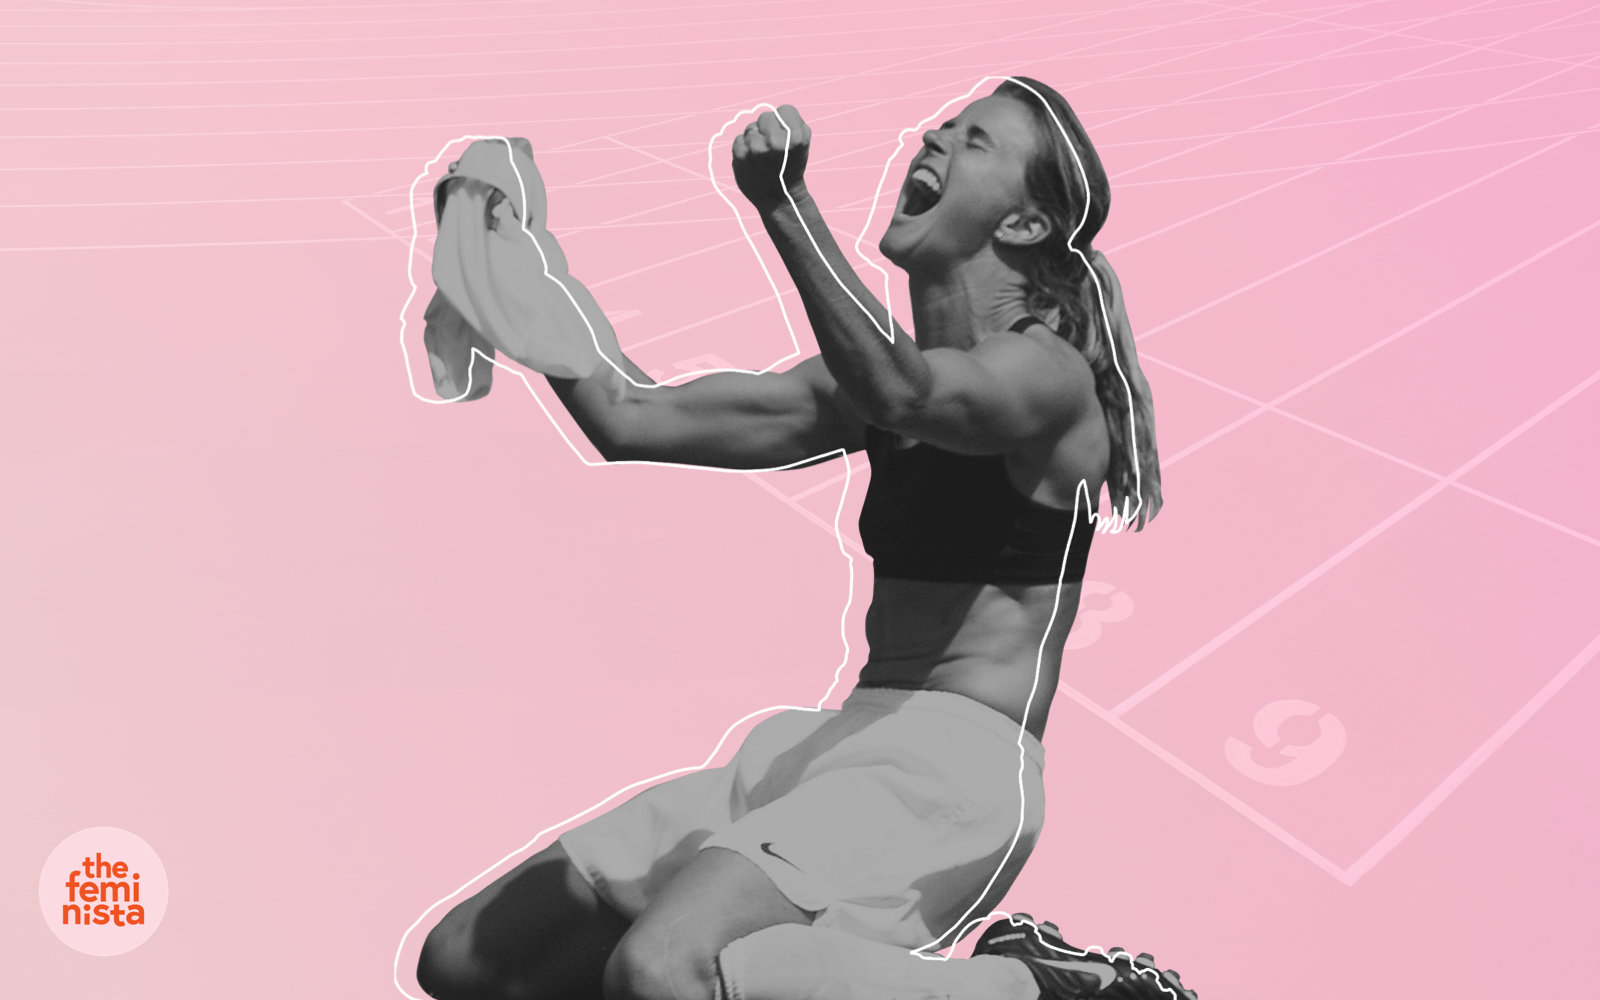 Women's soccer player celebrating a goal with arms up on her knees on a pink background with The Feminista logo 